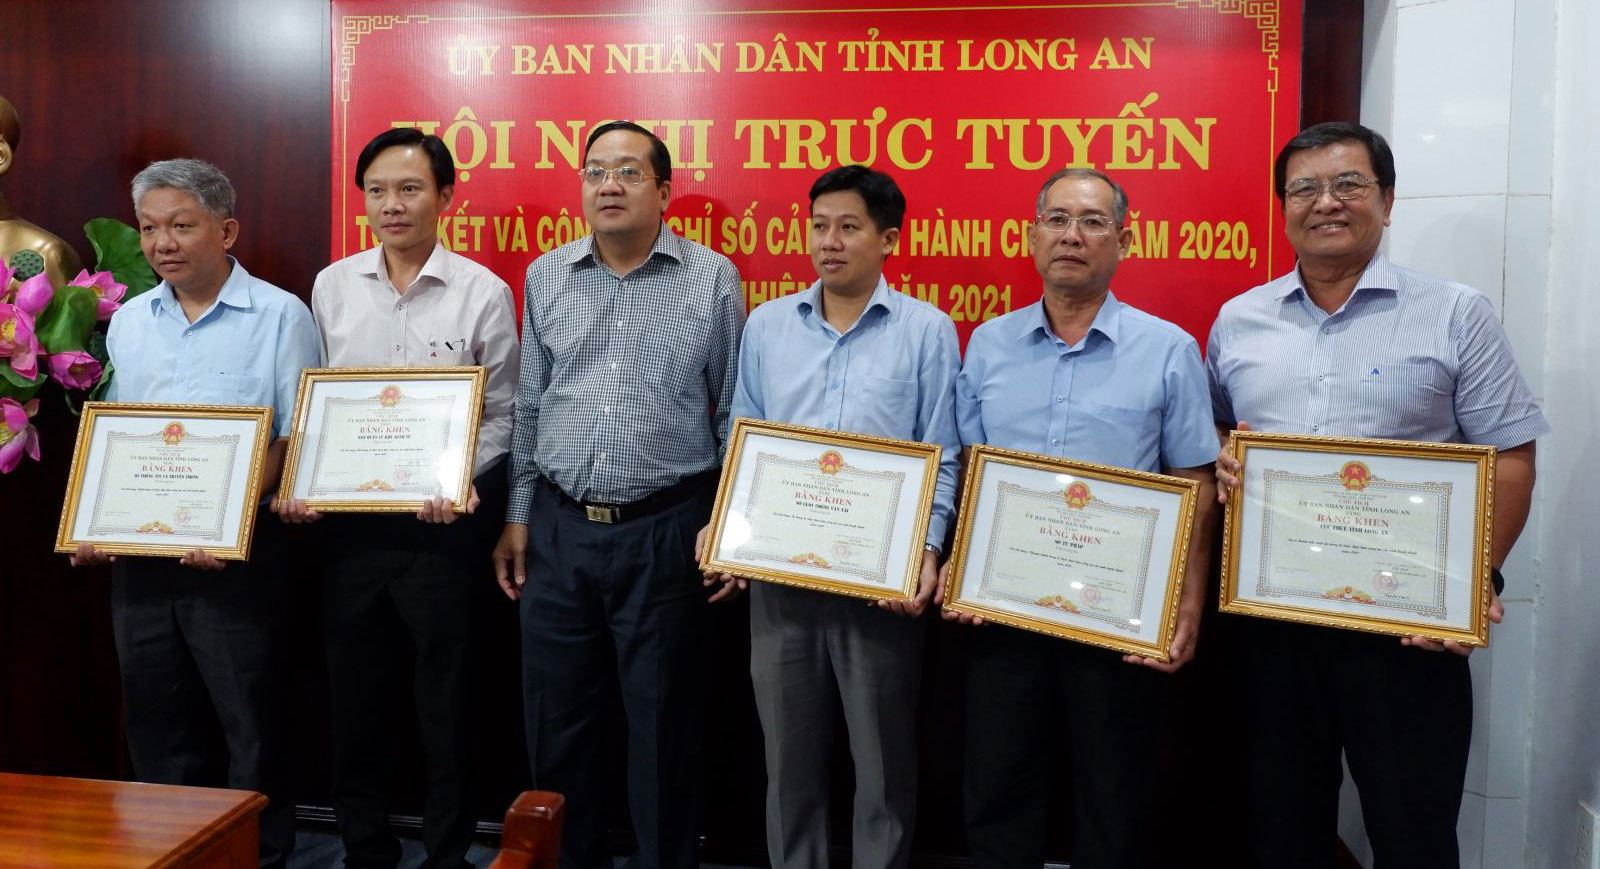 The Provincial People's Committee awards certificates of merit to 9 collectives with many outstanding achievements in organizing and implementing administrative reform in 2020